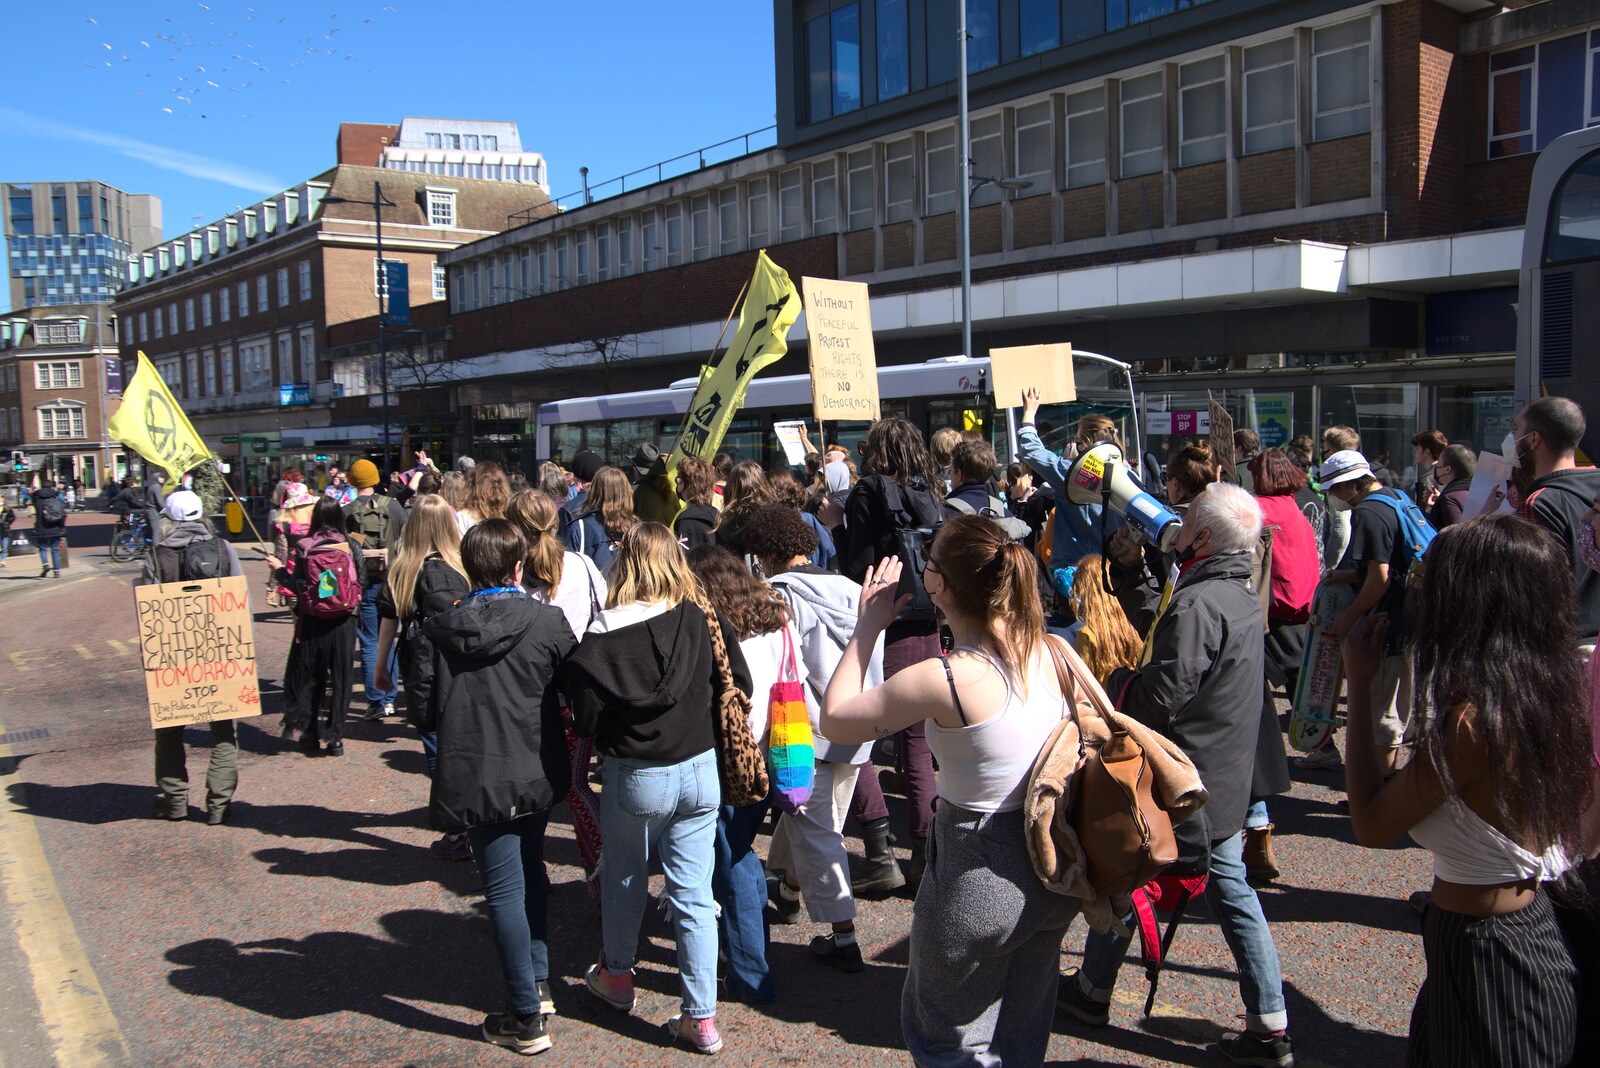 The demo moves along St. Stephen's from The Death of Debenhams, Rampant Horse Street, Norwich, Norfolk - 17th April 2021